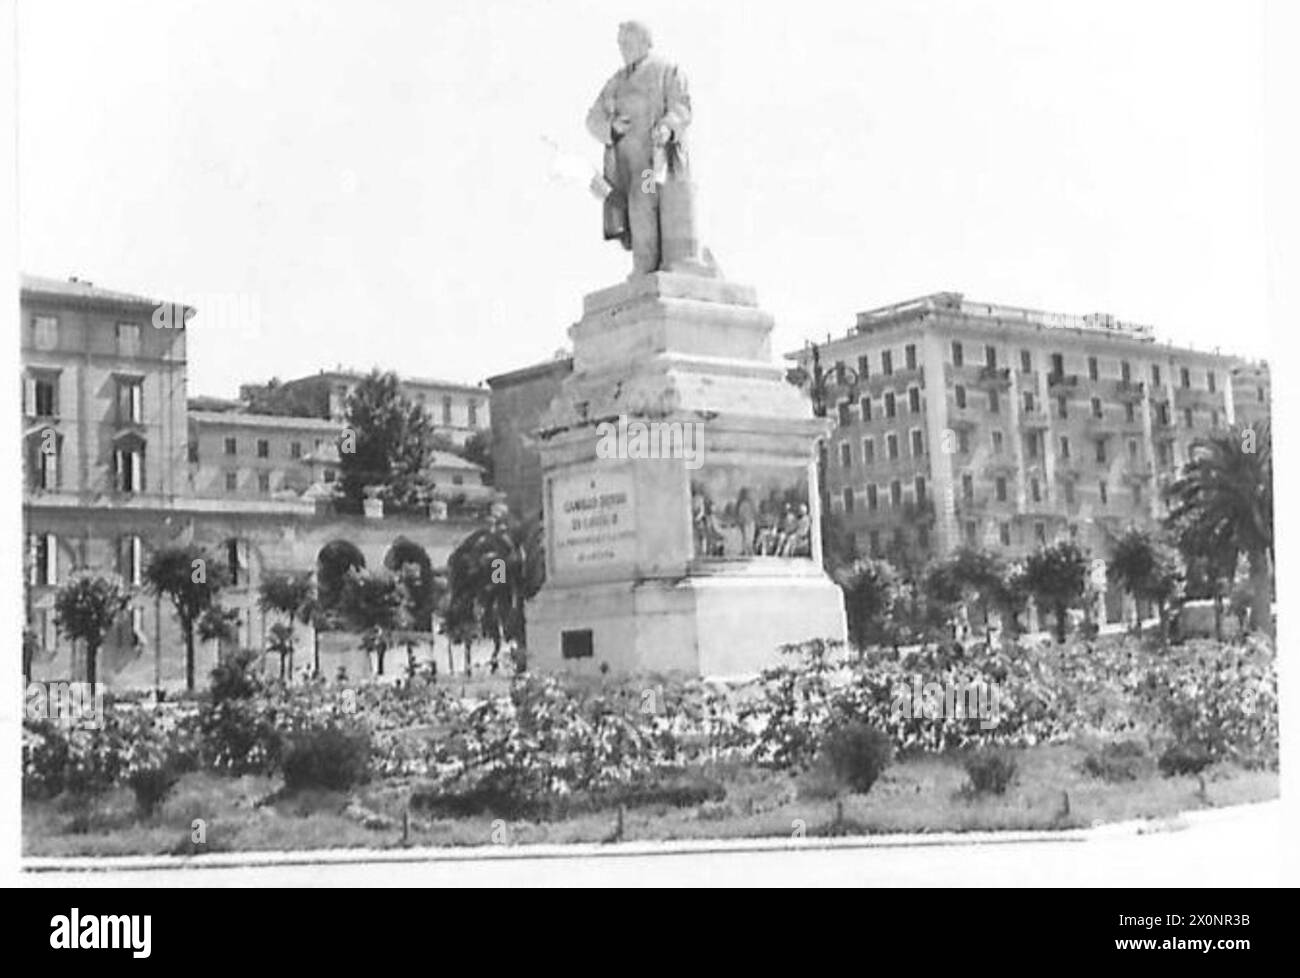 THE POLISH ARMY IN THE ITALIAN CAMPAIGN, 1943-1945 - The Battle of Ancona. The Polish national flag hoisted by the monument to Count Camillo Benso di Cavour in the centre of the city after its capture by the 2nd Polish Corps, 19 July 1944 Polish Army, Polish Armed Forces in the West, Polish Corps, II Stock Photo